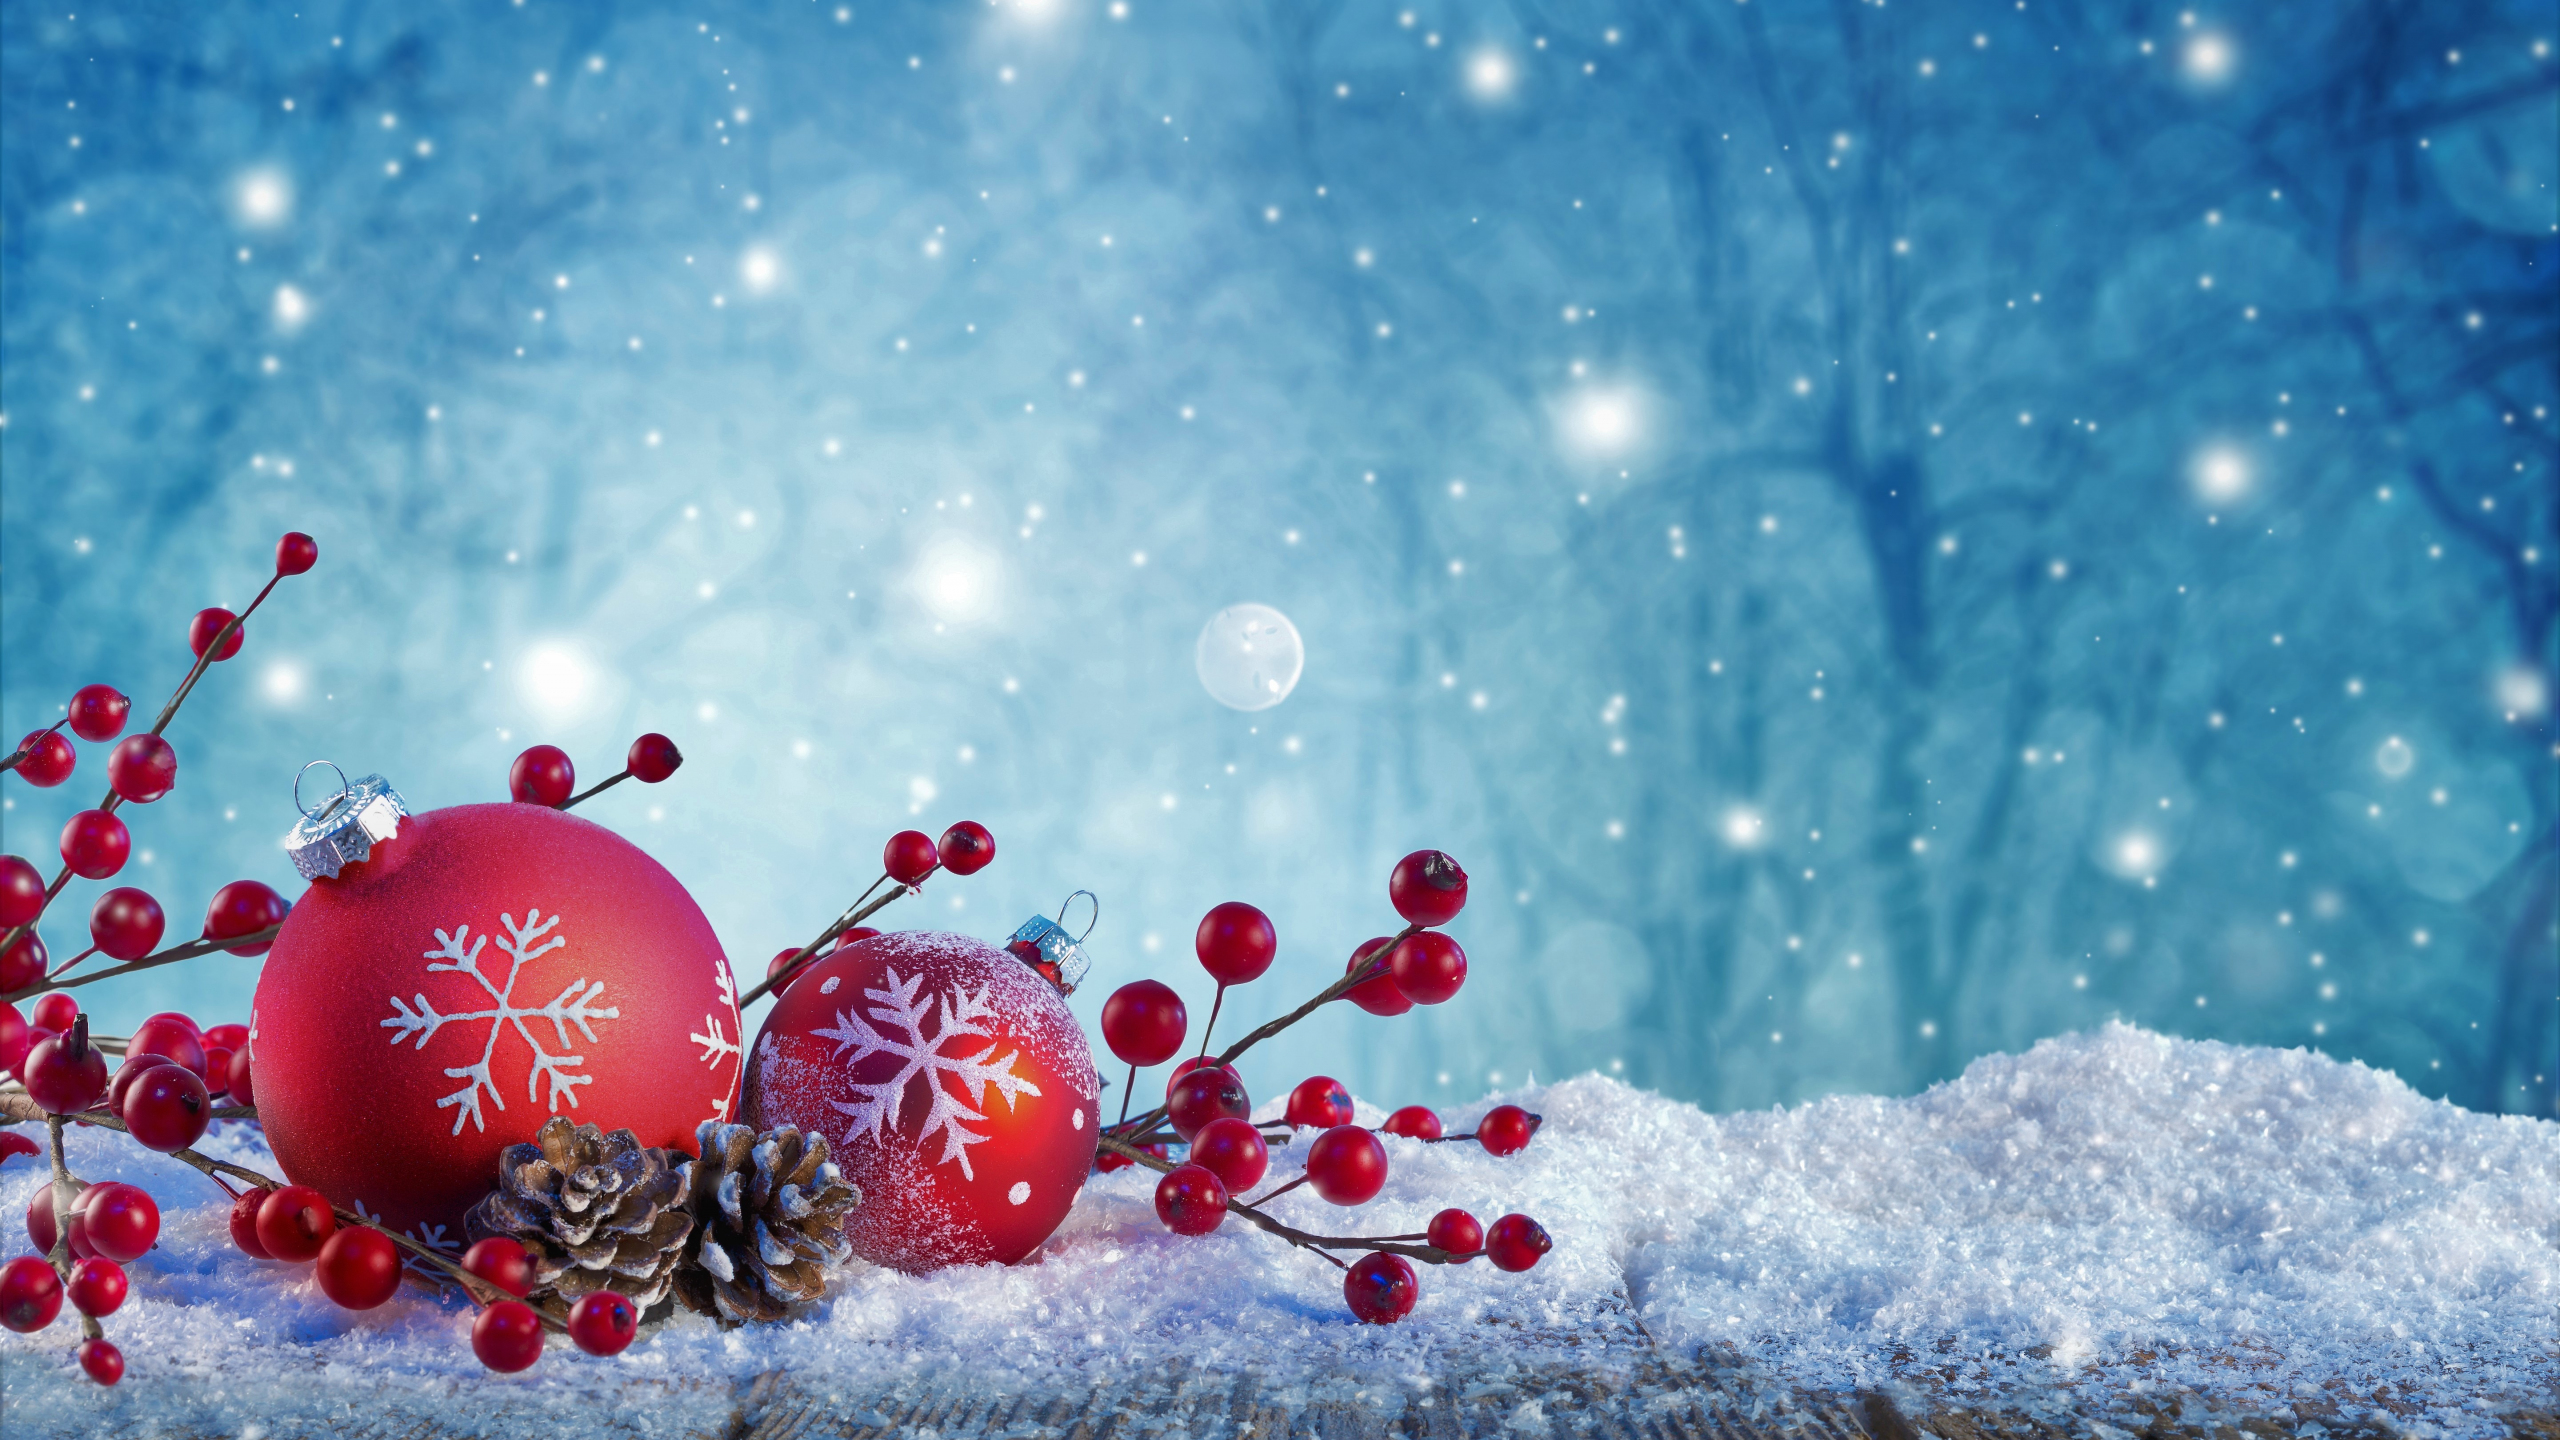 Download 2560x1440 wallpaper christmas, ornaments, decorations, holiday, dual wide, widescreen 16: widescreen, 2560x1440 HD image, background, 1320